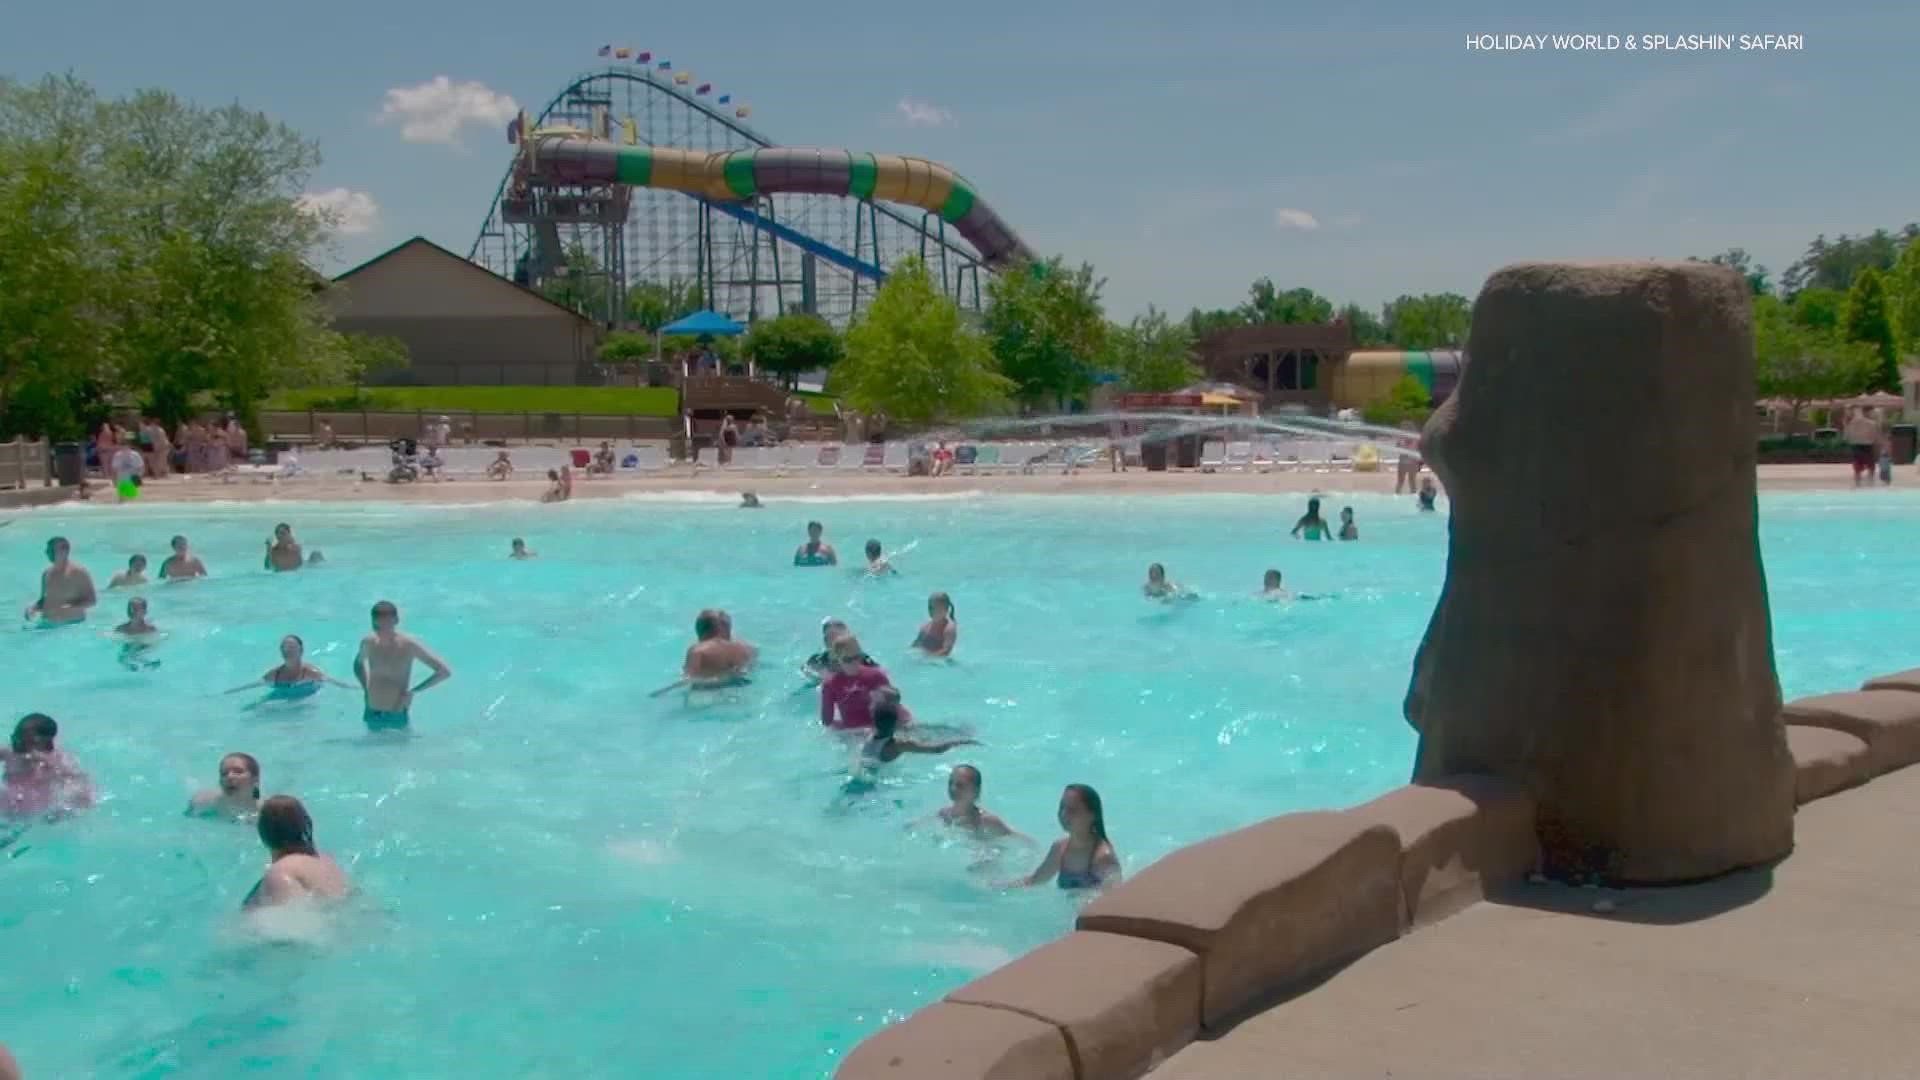 Starting next year, Holiday World and Splashin' Safari will offer free admission for kids who are 4 and 5 years old.